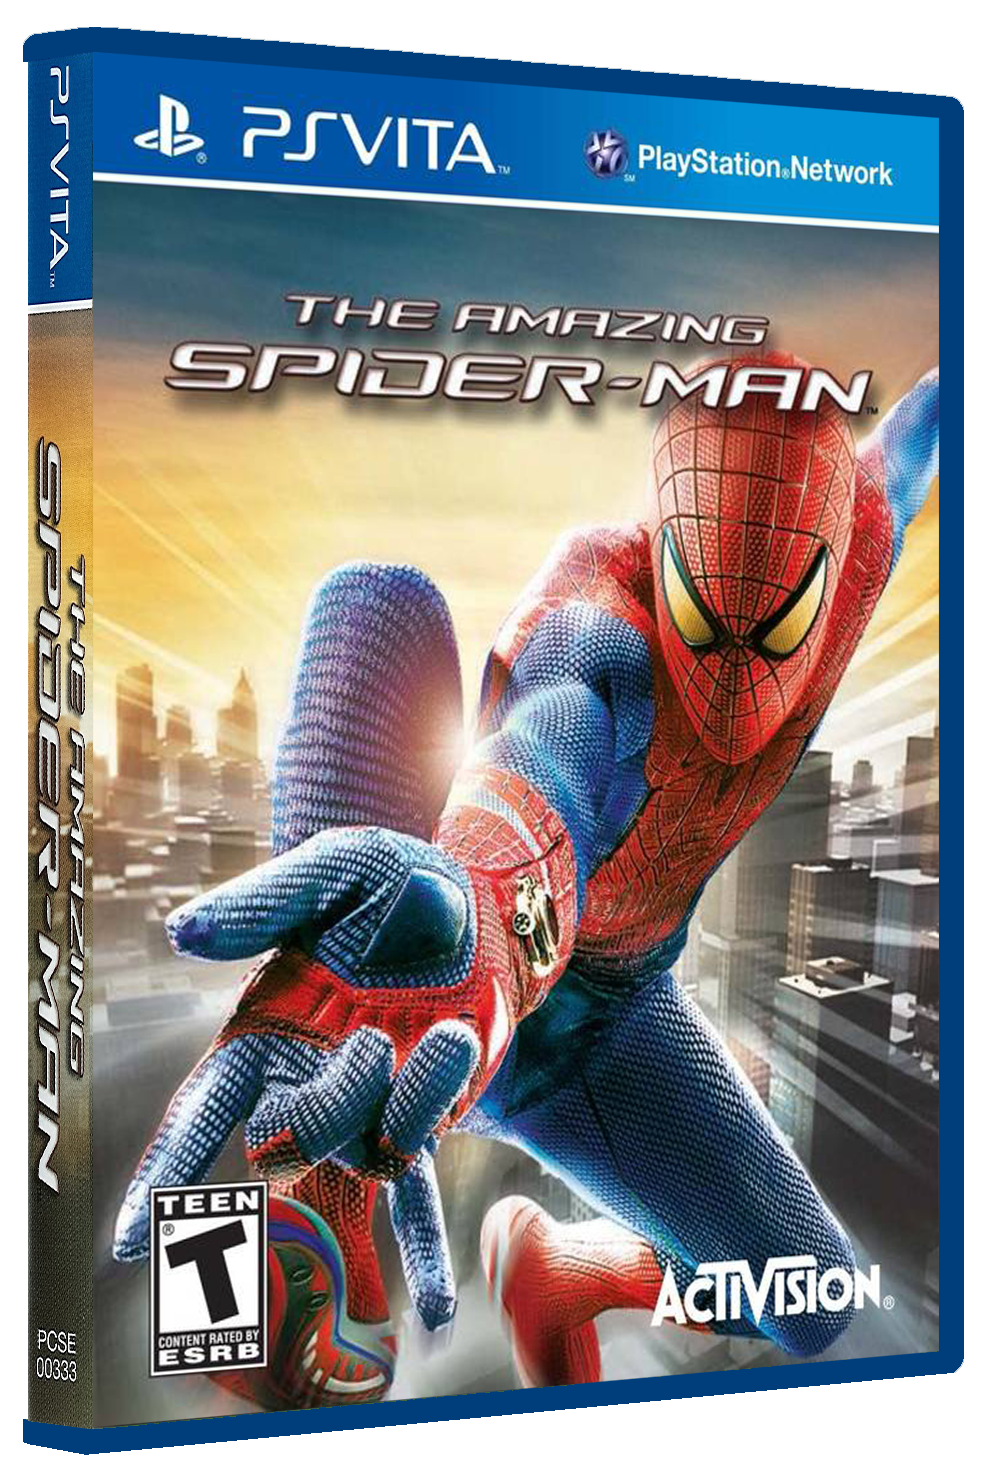 The Amazing Spider-Man Details - LaunchBox Games Database